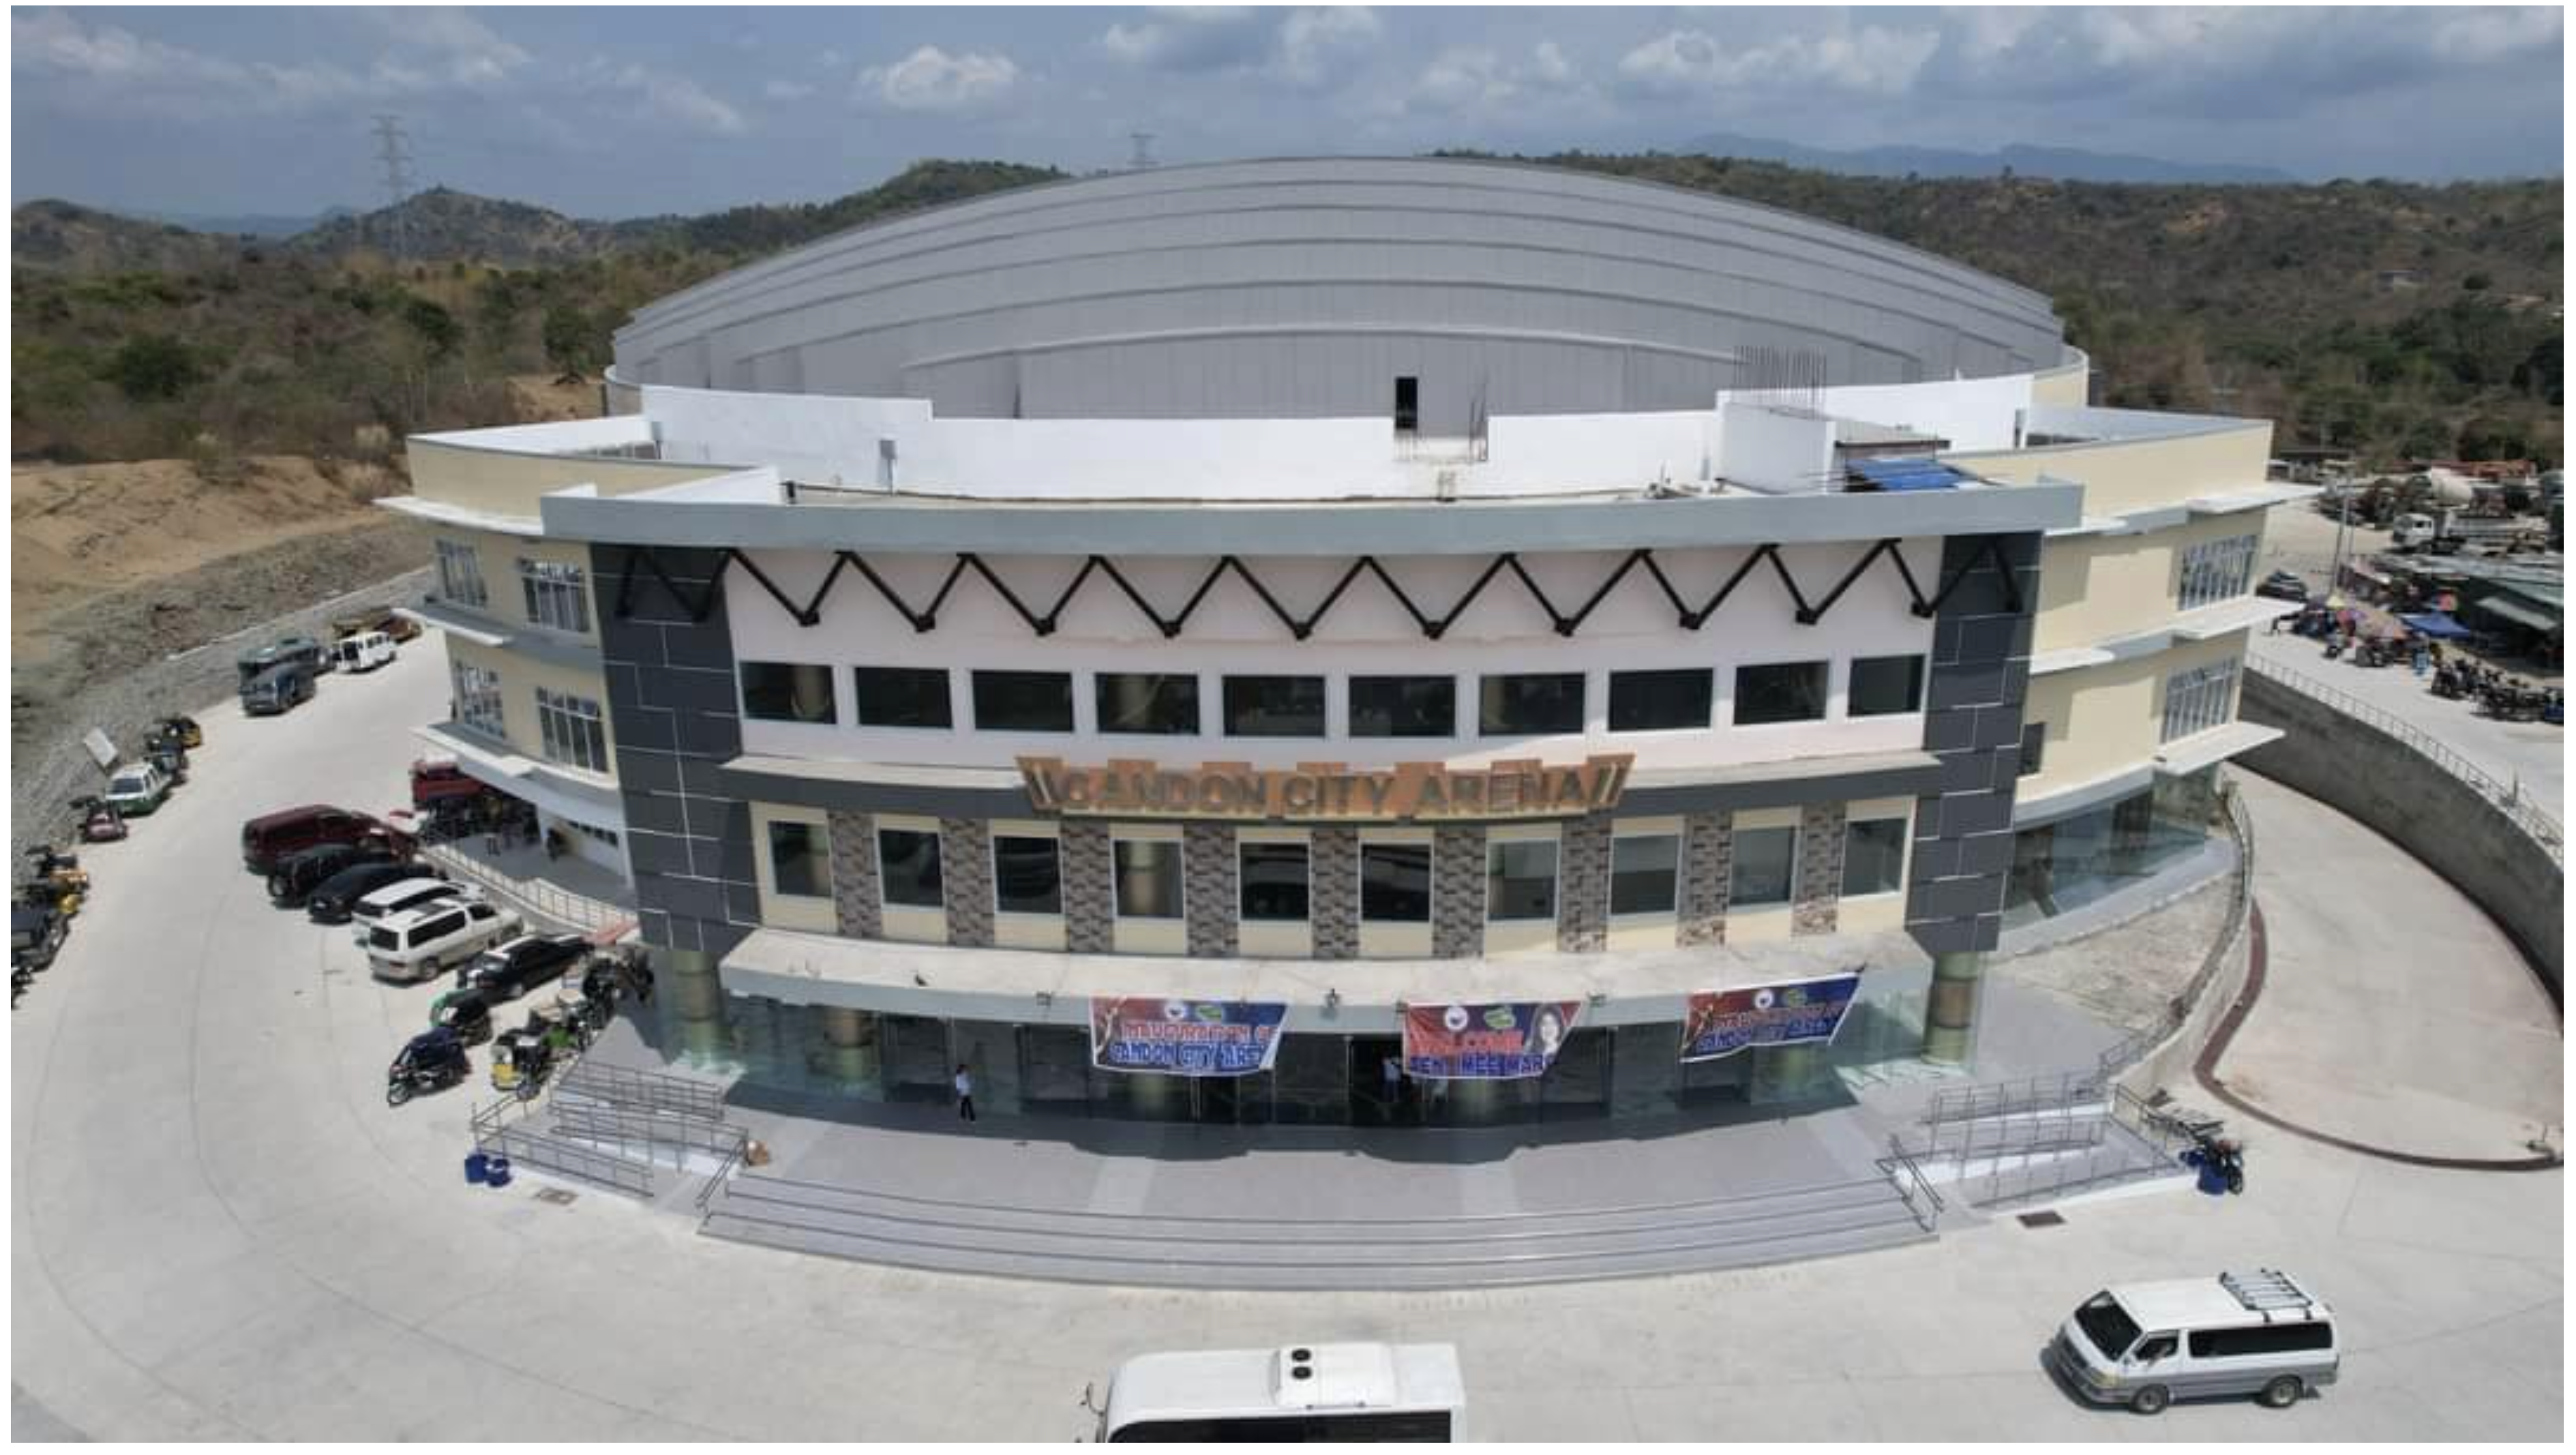 LOOK | CANDON CITY ARENA NOW OFFICIALLY OPEN